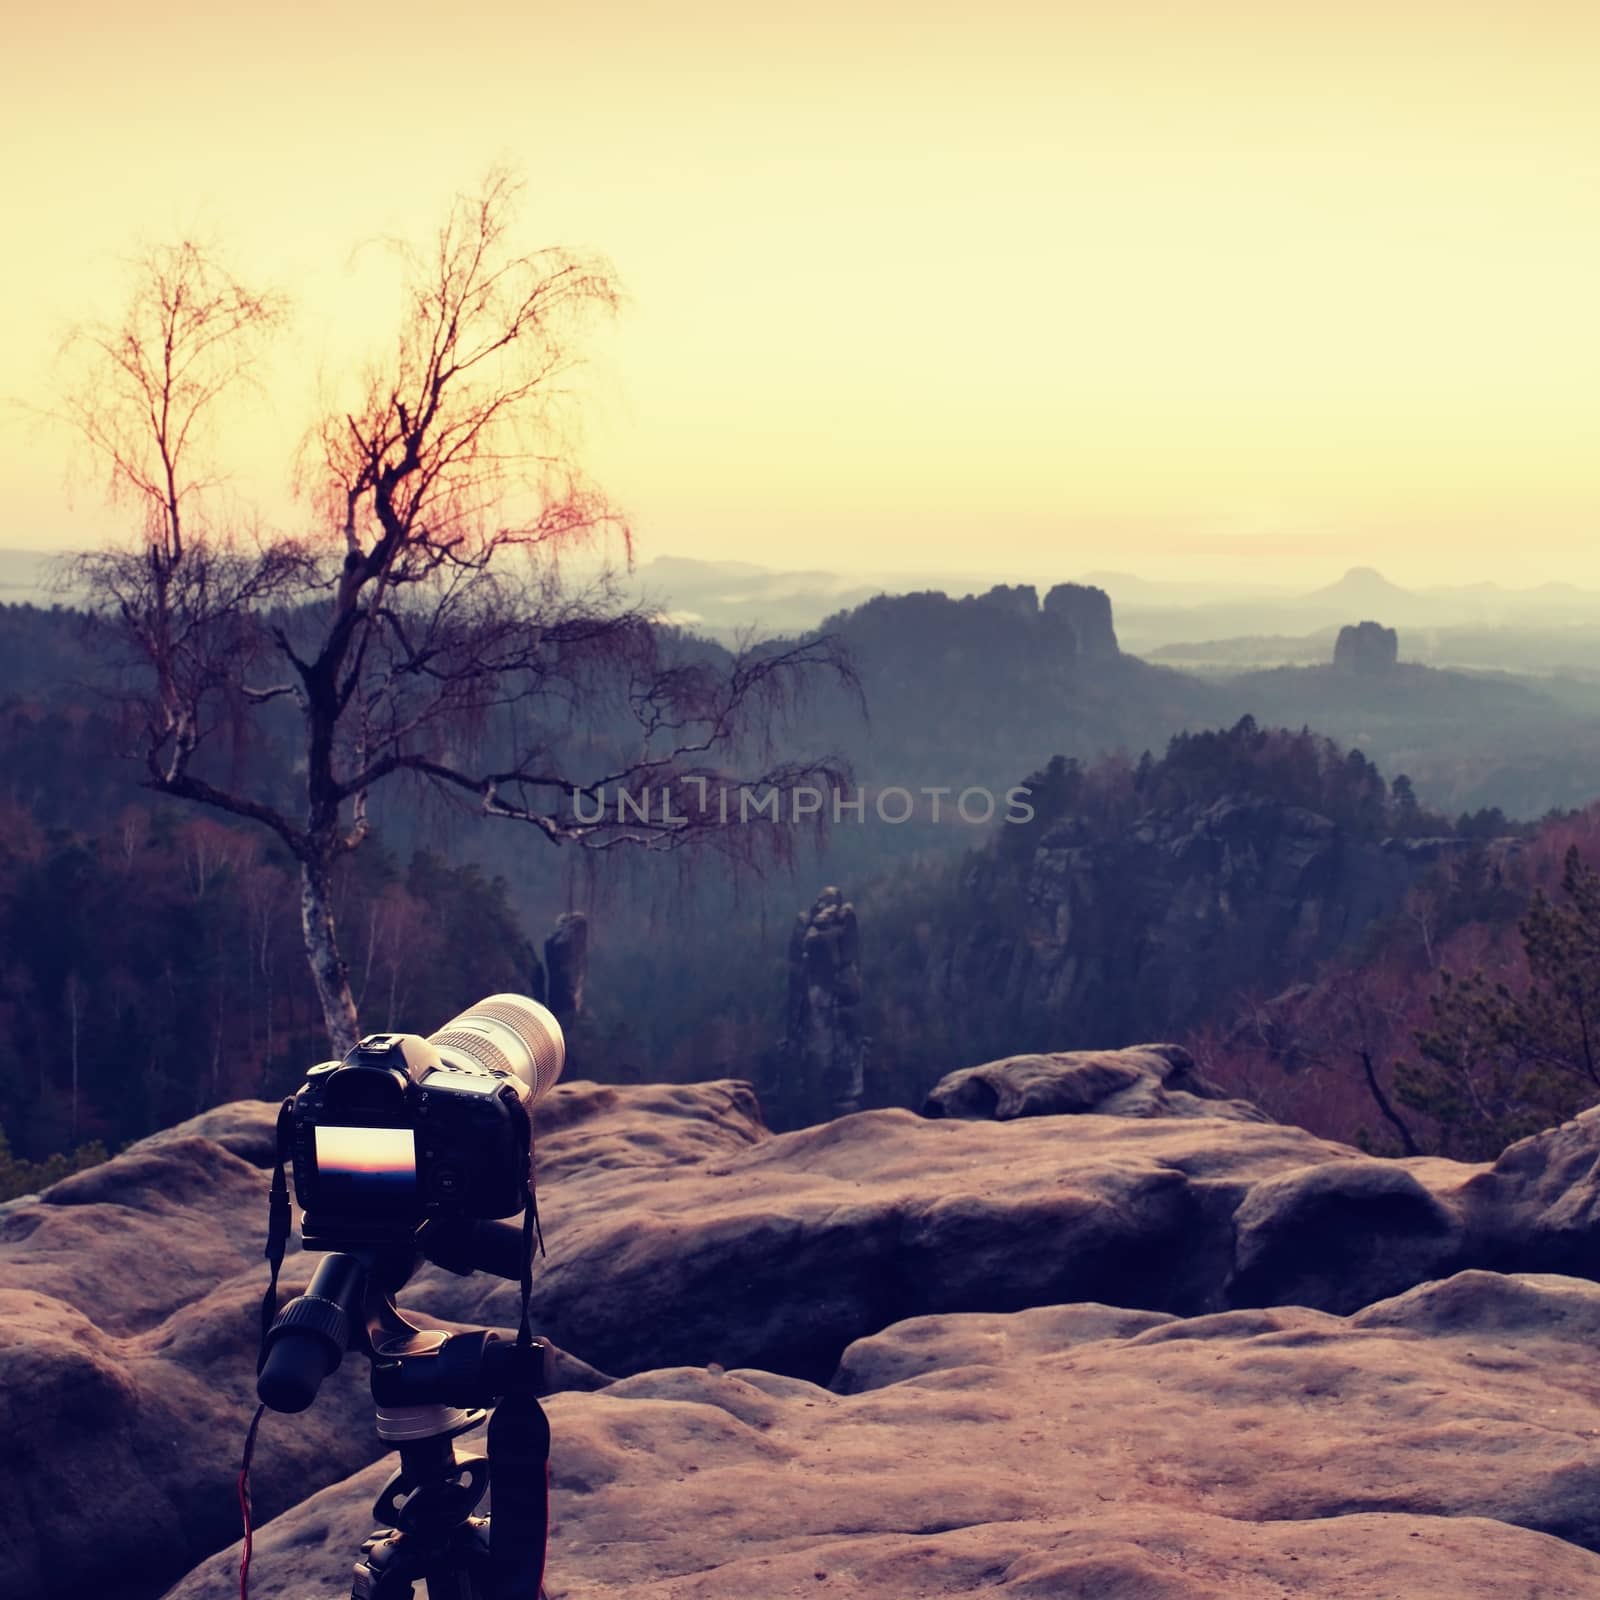 Tripod with big camera stand on mountain peak after sunset. Sharp sandstone cliffs at horizon